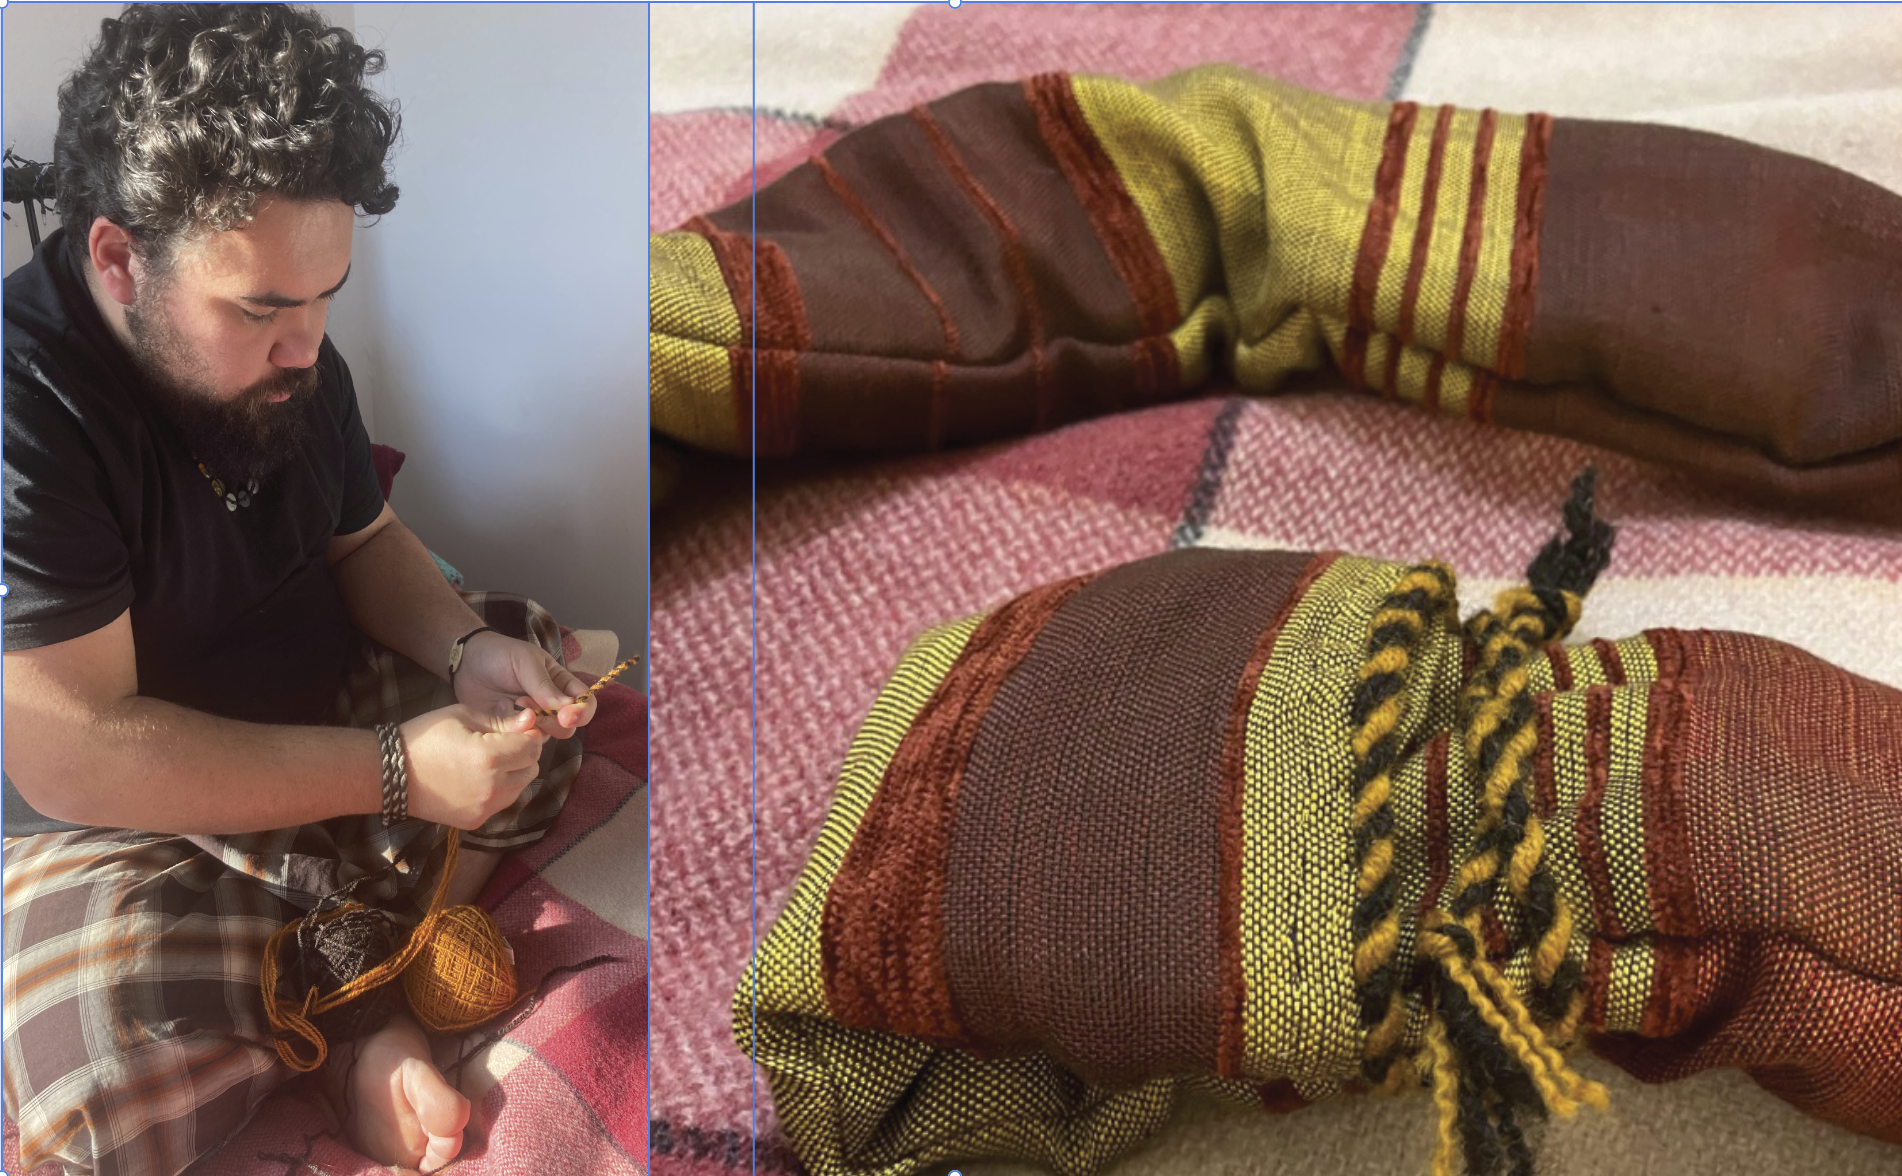 A composite of two images. On the left, a young bearded man in robe and t-shirt is plaiting strands of orange and brown wool into a cord; balls of both wools are visible by his knee. On the right, the fabric bag is folded to reveal various panels of red and gold fabric, tied at one end by the plaited orange and brown cord.